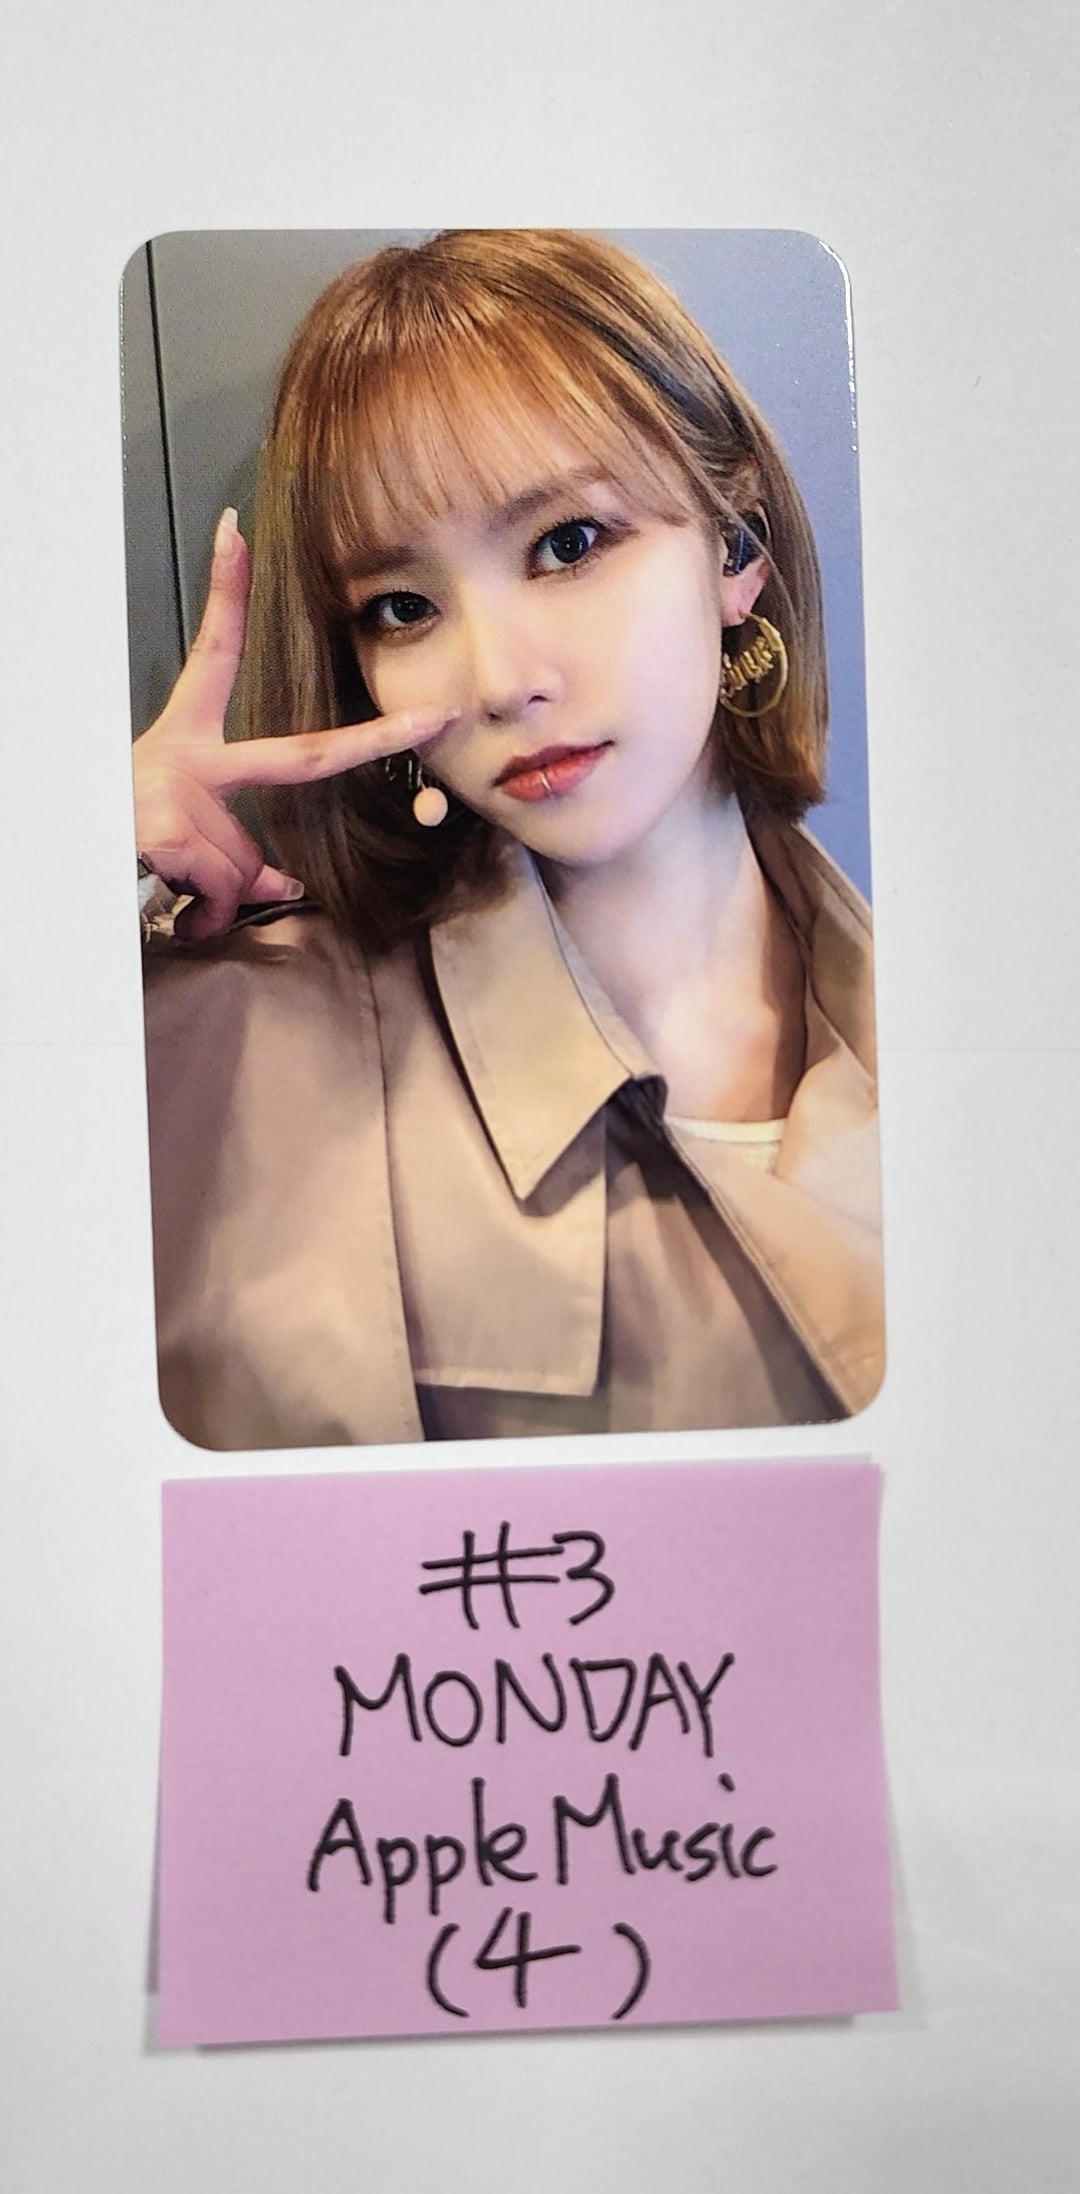 Weeekly "Play Game : AWAKE" - Apple Music Fansign Event Photocard Round 4